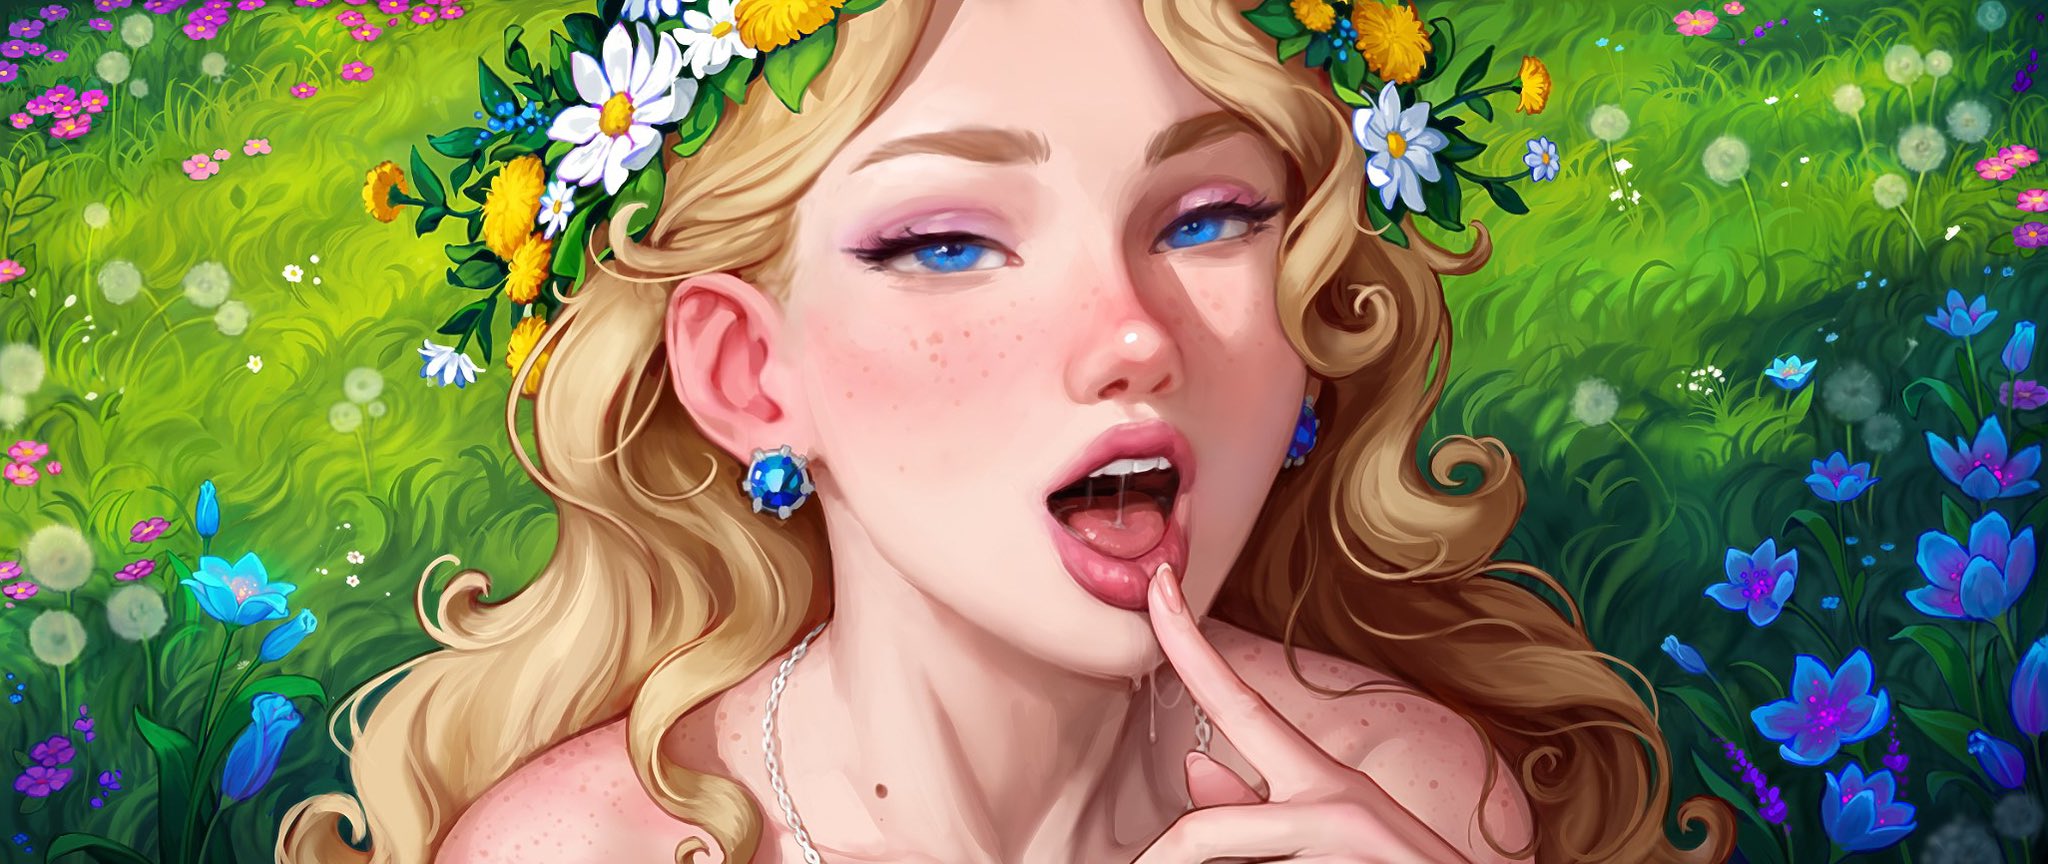 Blonde Blue Eyes Saliva Open Mouth Flowers Flower Crown Looking At Viewer Grass Earring Tongues 2048x864